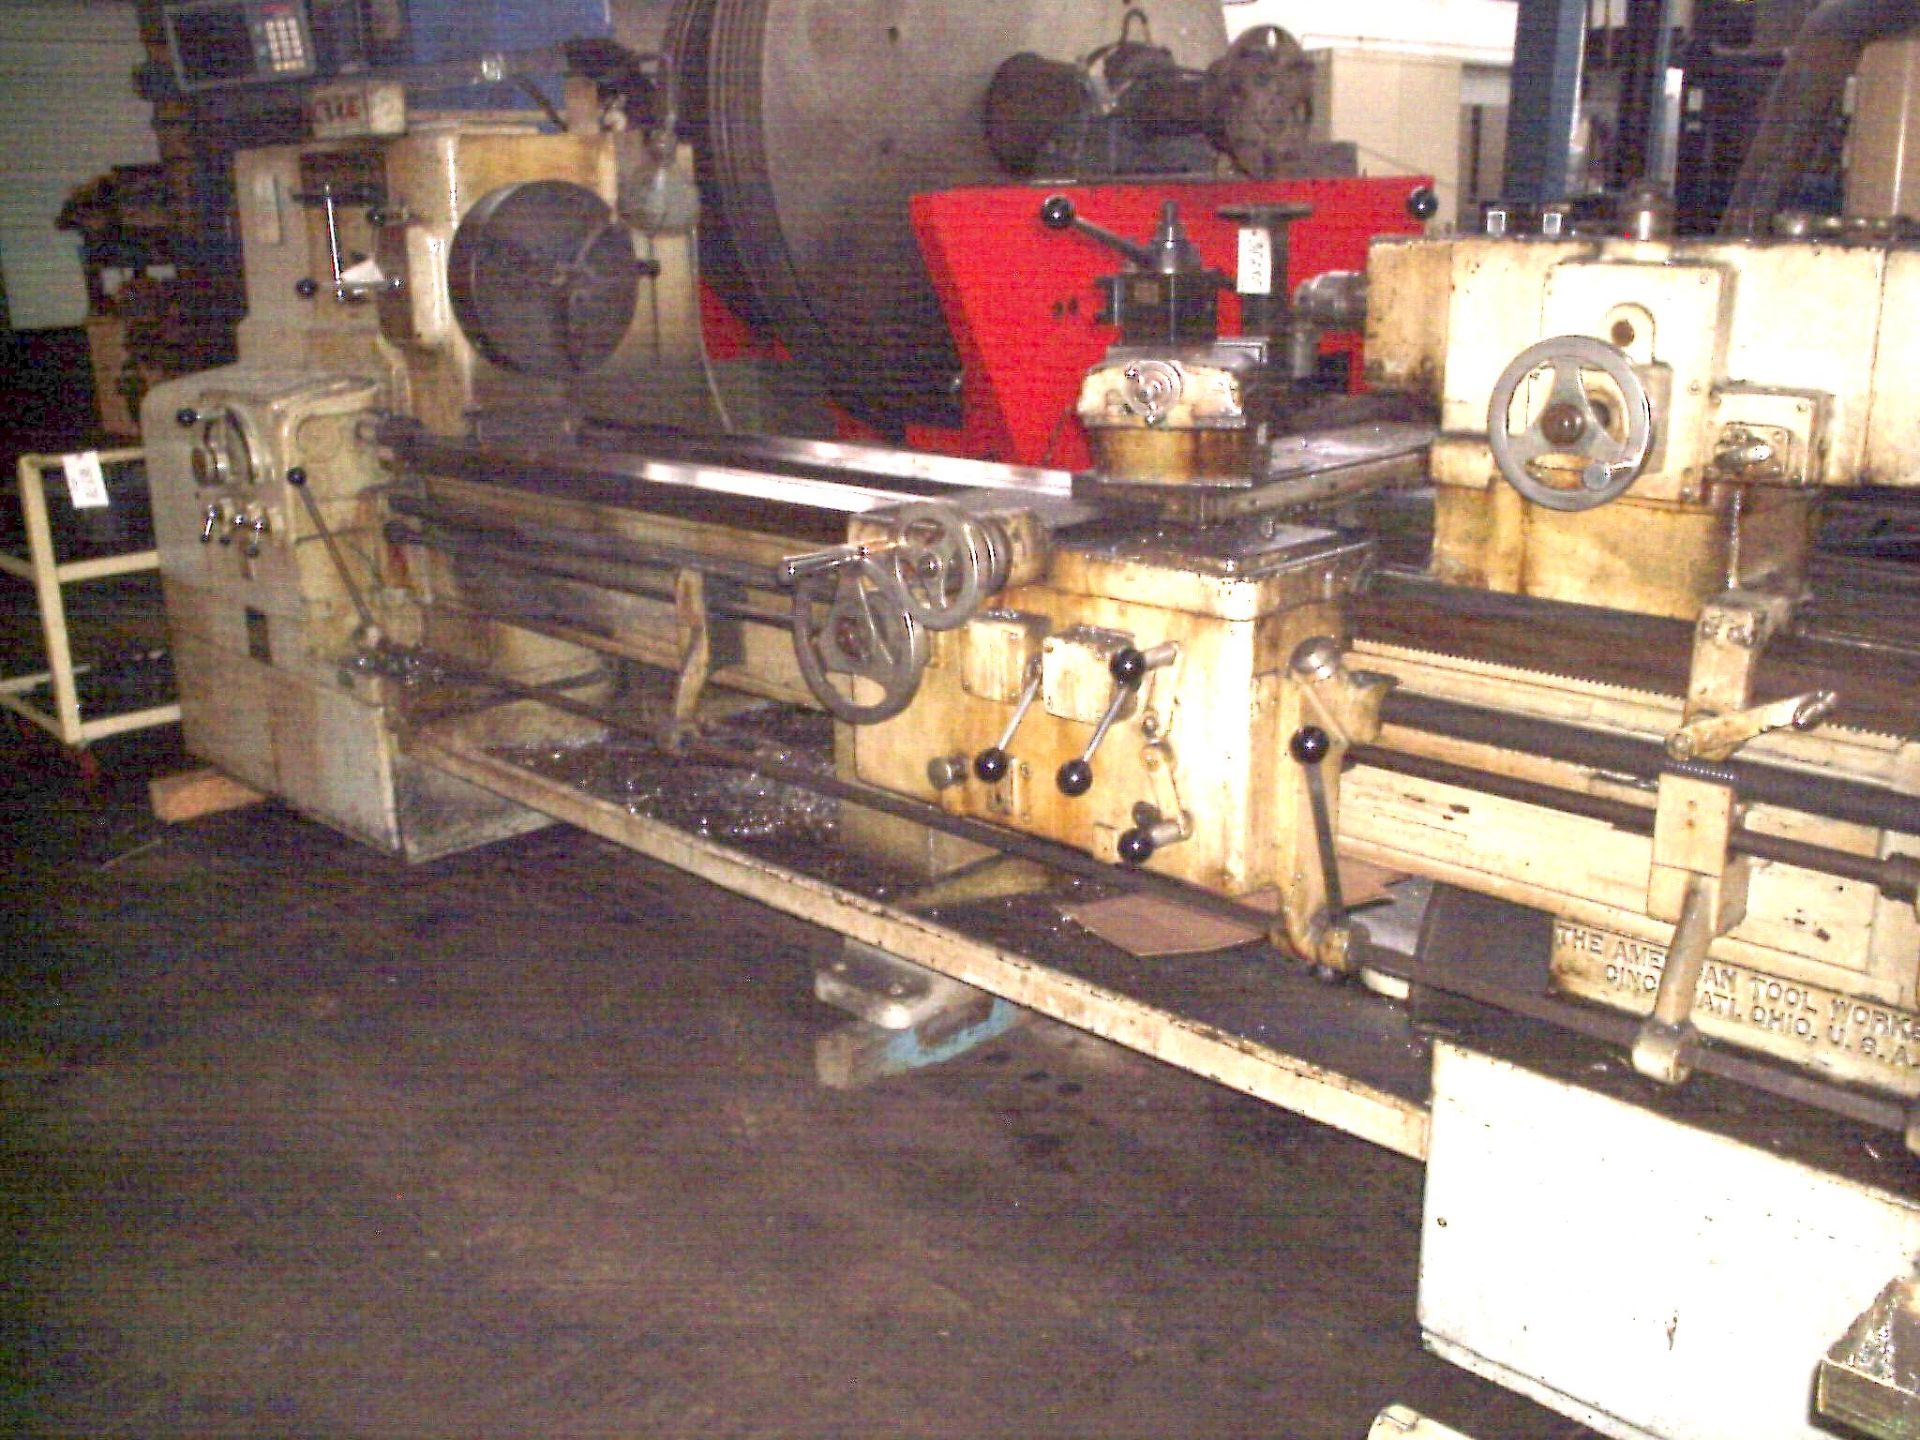 AMERICAN PACEMAKER HEAVY DUTY LATHE 20" X 78", LOCATION DETROIT, MI, BUYER TO SHIP, LOADING FEE 400 - Image 2 of 3